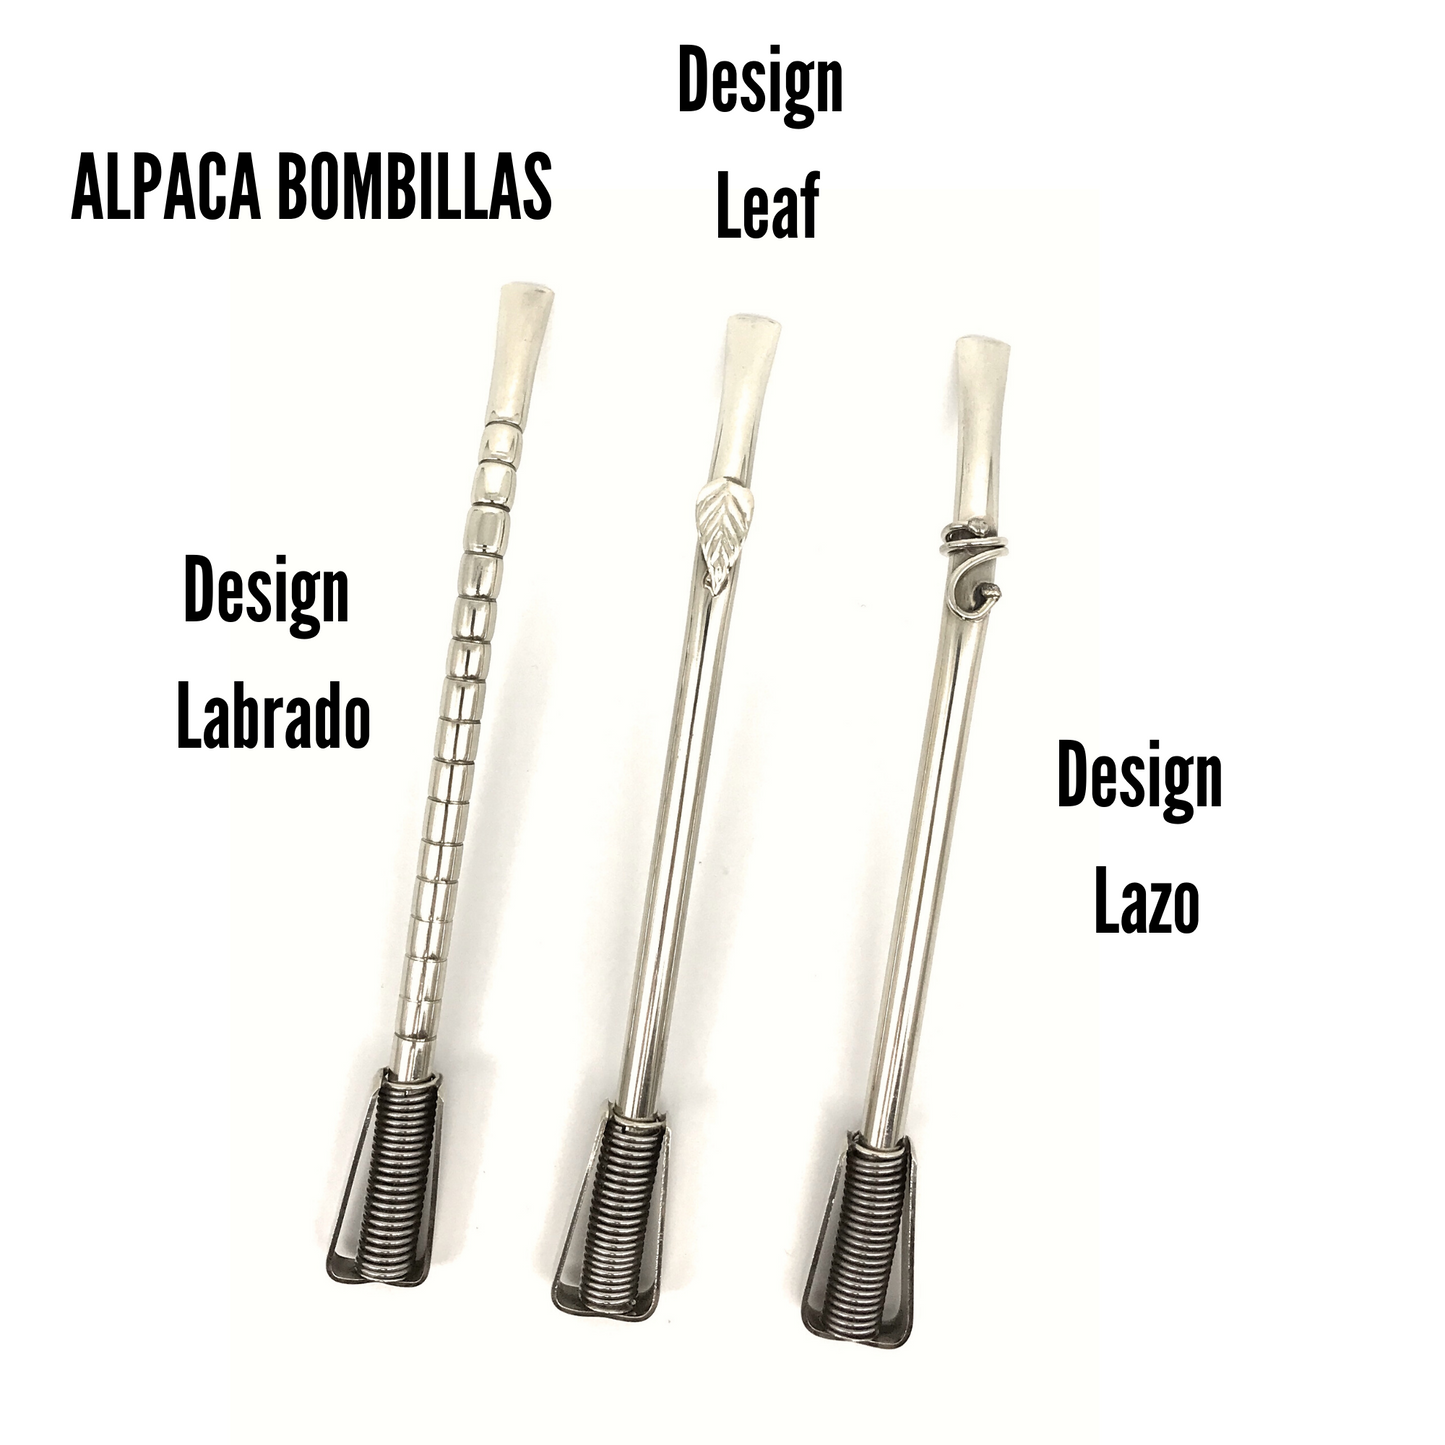 SET One bombilla & One cleaning brush  PREMIUM Artisanal german silver straw (Alpaca bombilla) | Made in Argentina | Removable spring filter | 6.5 in long | 3 Designs to choose from